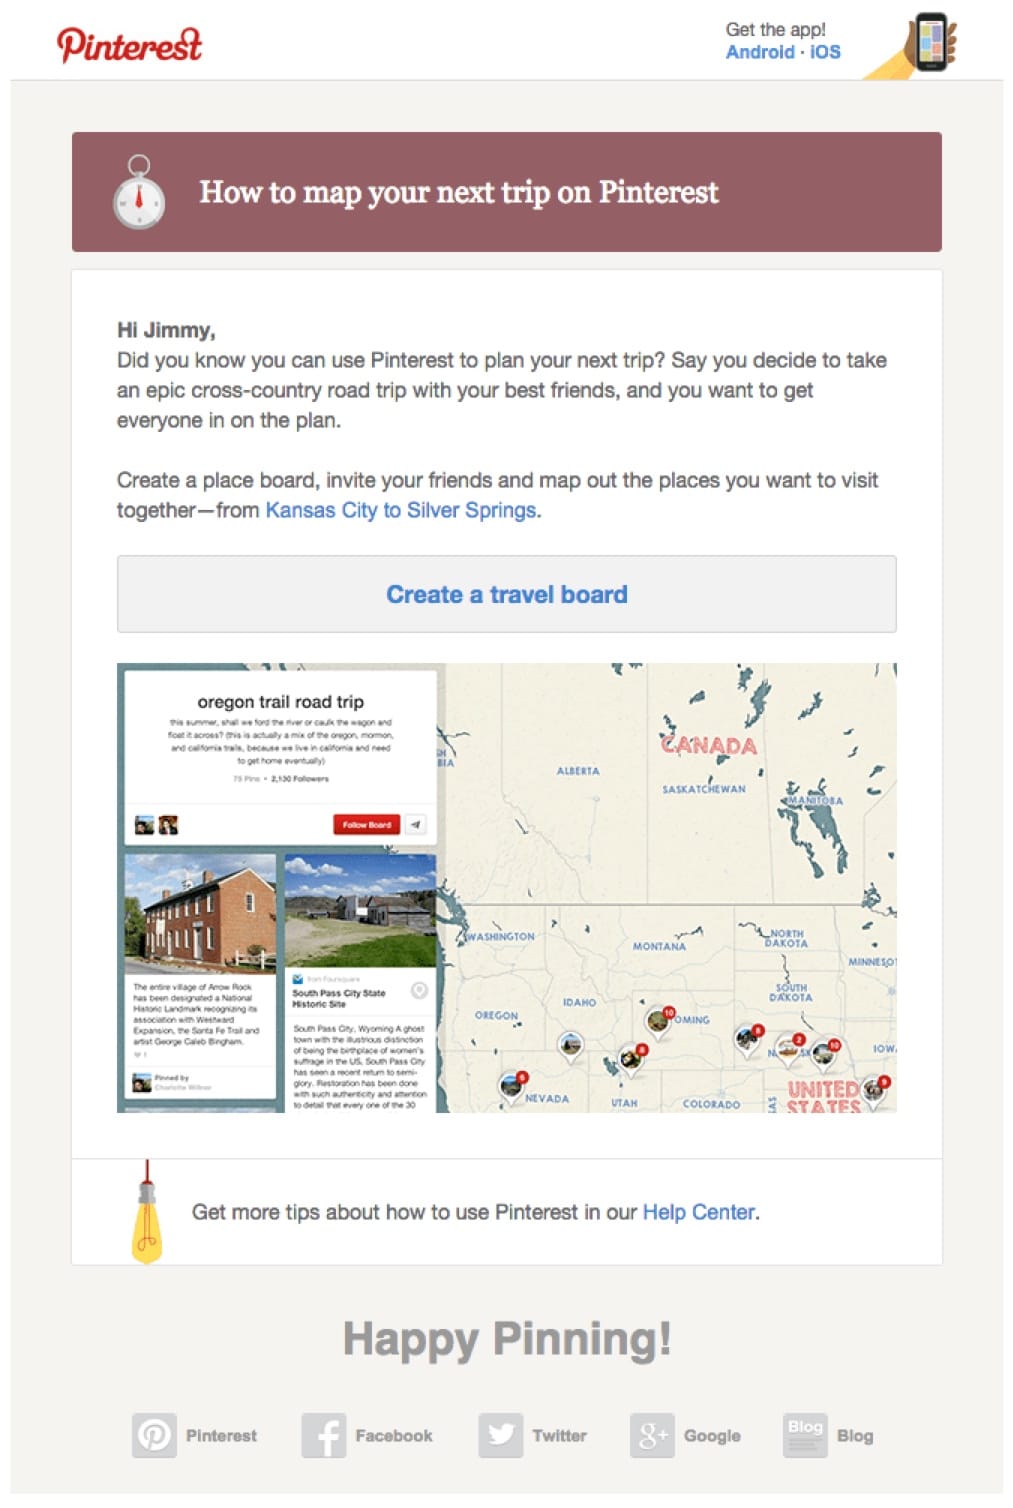 promotional email example pinterest (did you know email)